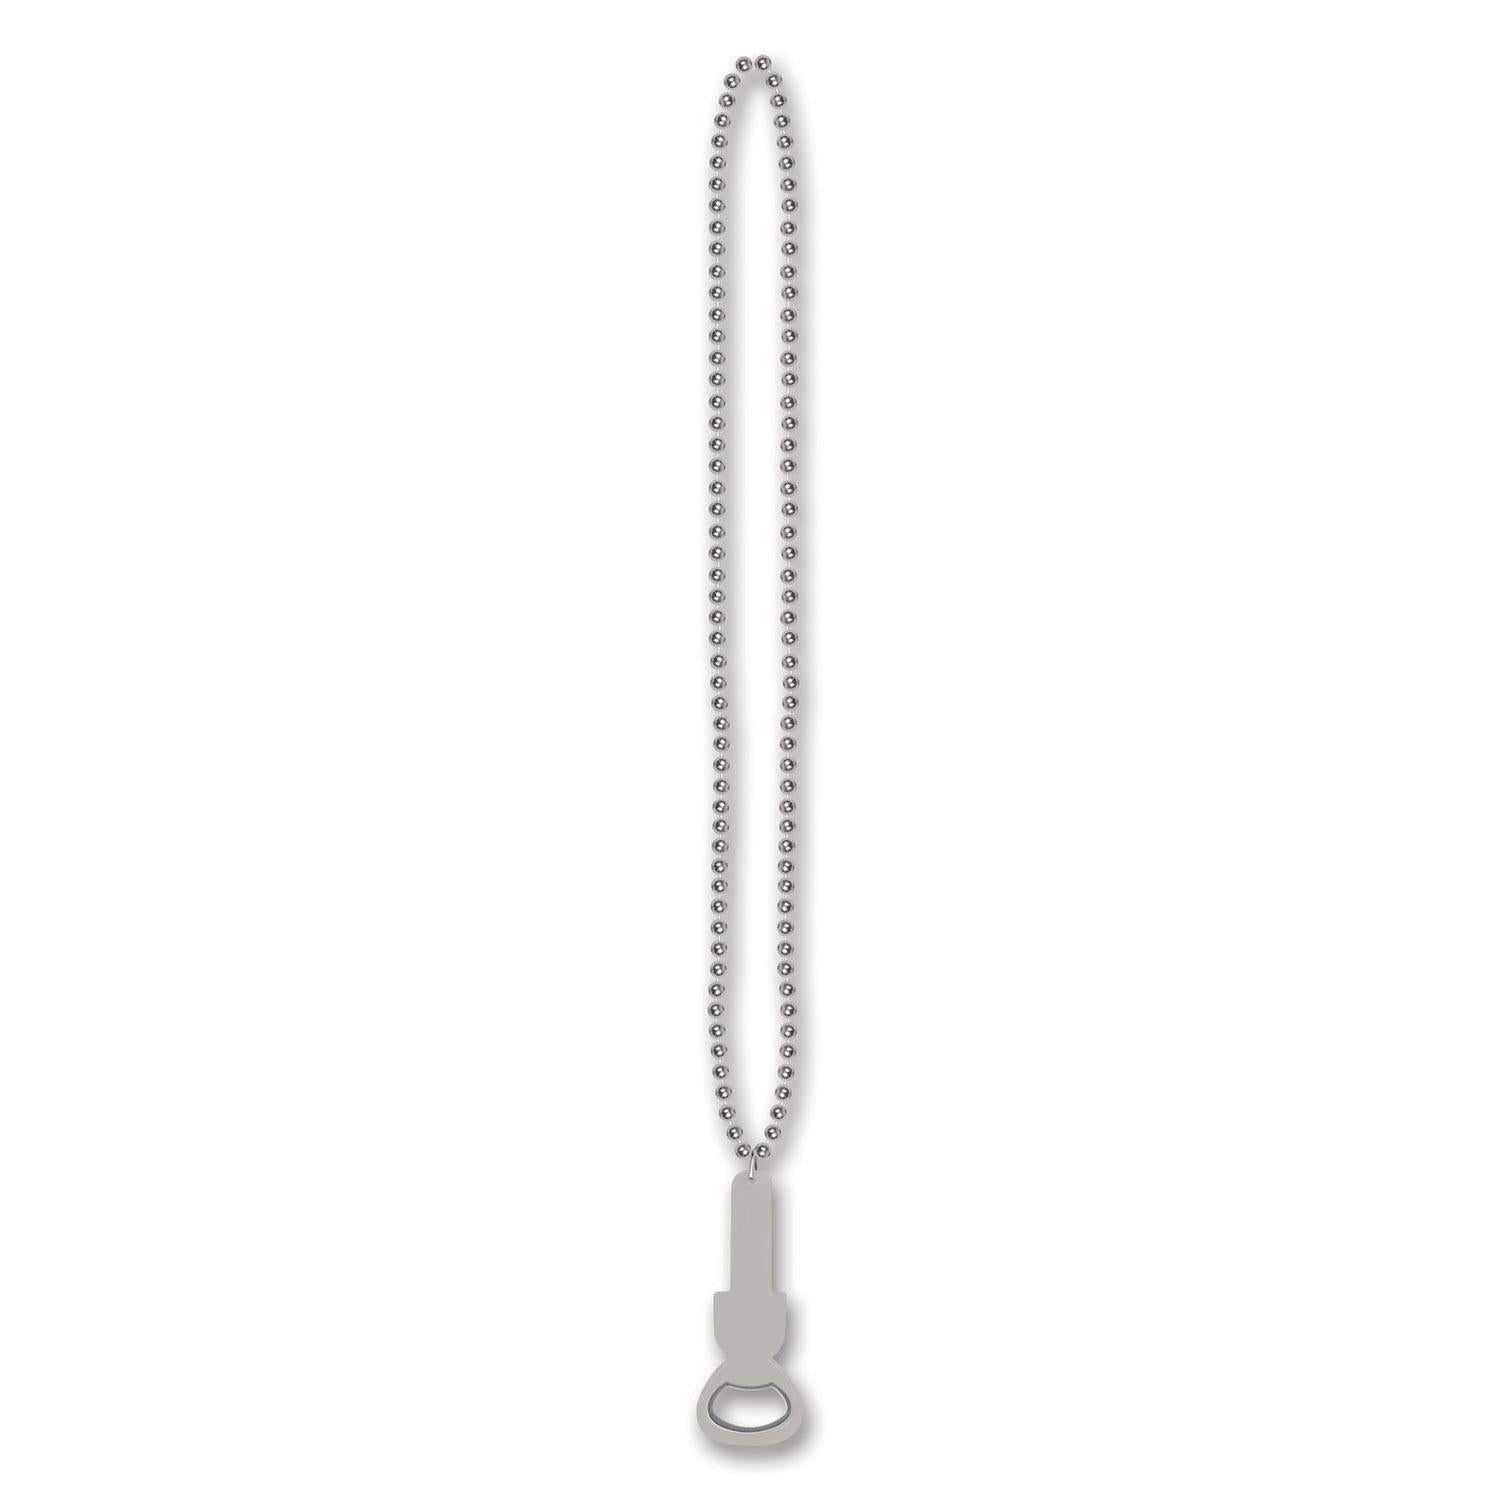 Beistle Bead Necklaces with Bottle Opener - silver